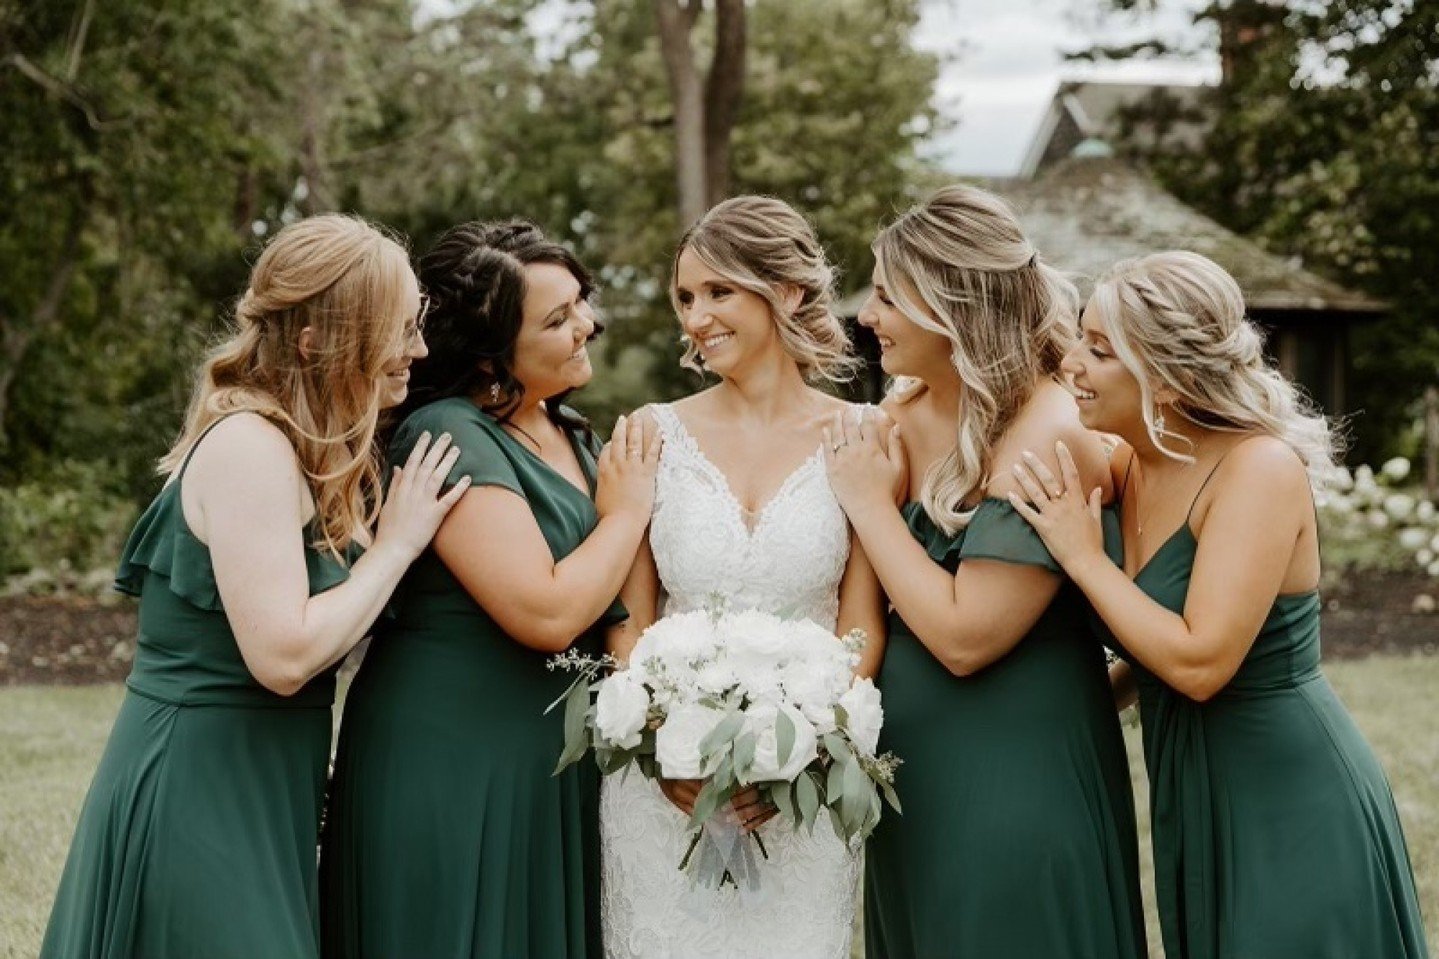 Love is in the air! 💕 As hair and makeup artist&rsquo;s, we&rsquo;ve had the privilege of helping countless brides and grooms look and feel their best on their special day. It's an honor to be a part of such a significant moment in their lives. 

Af